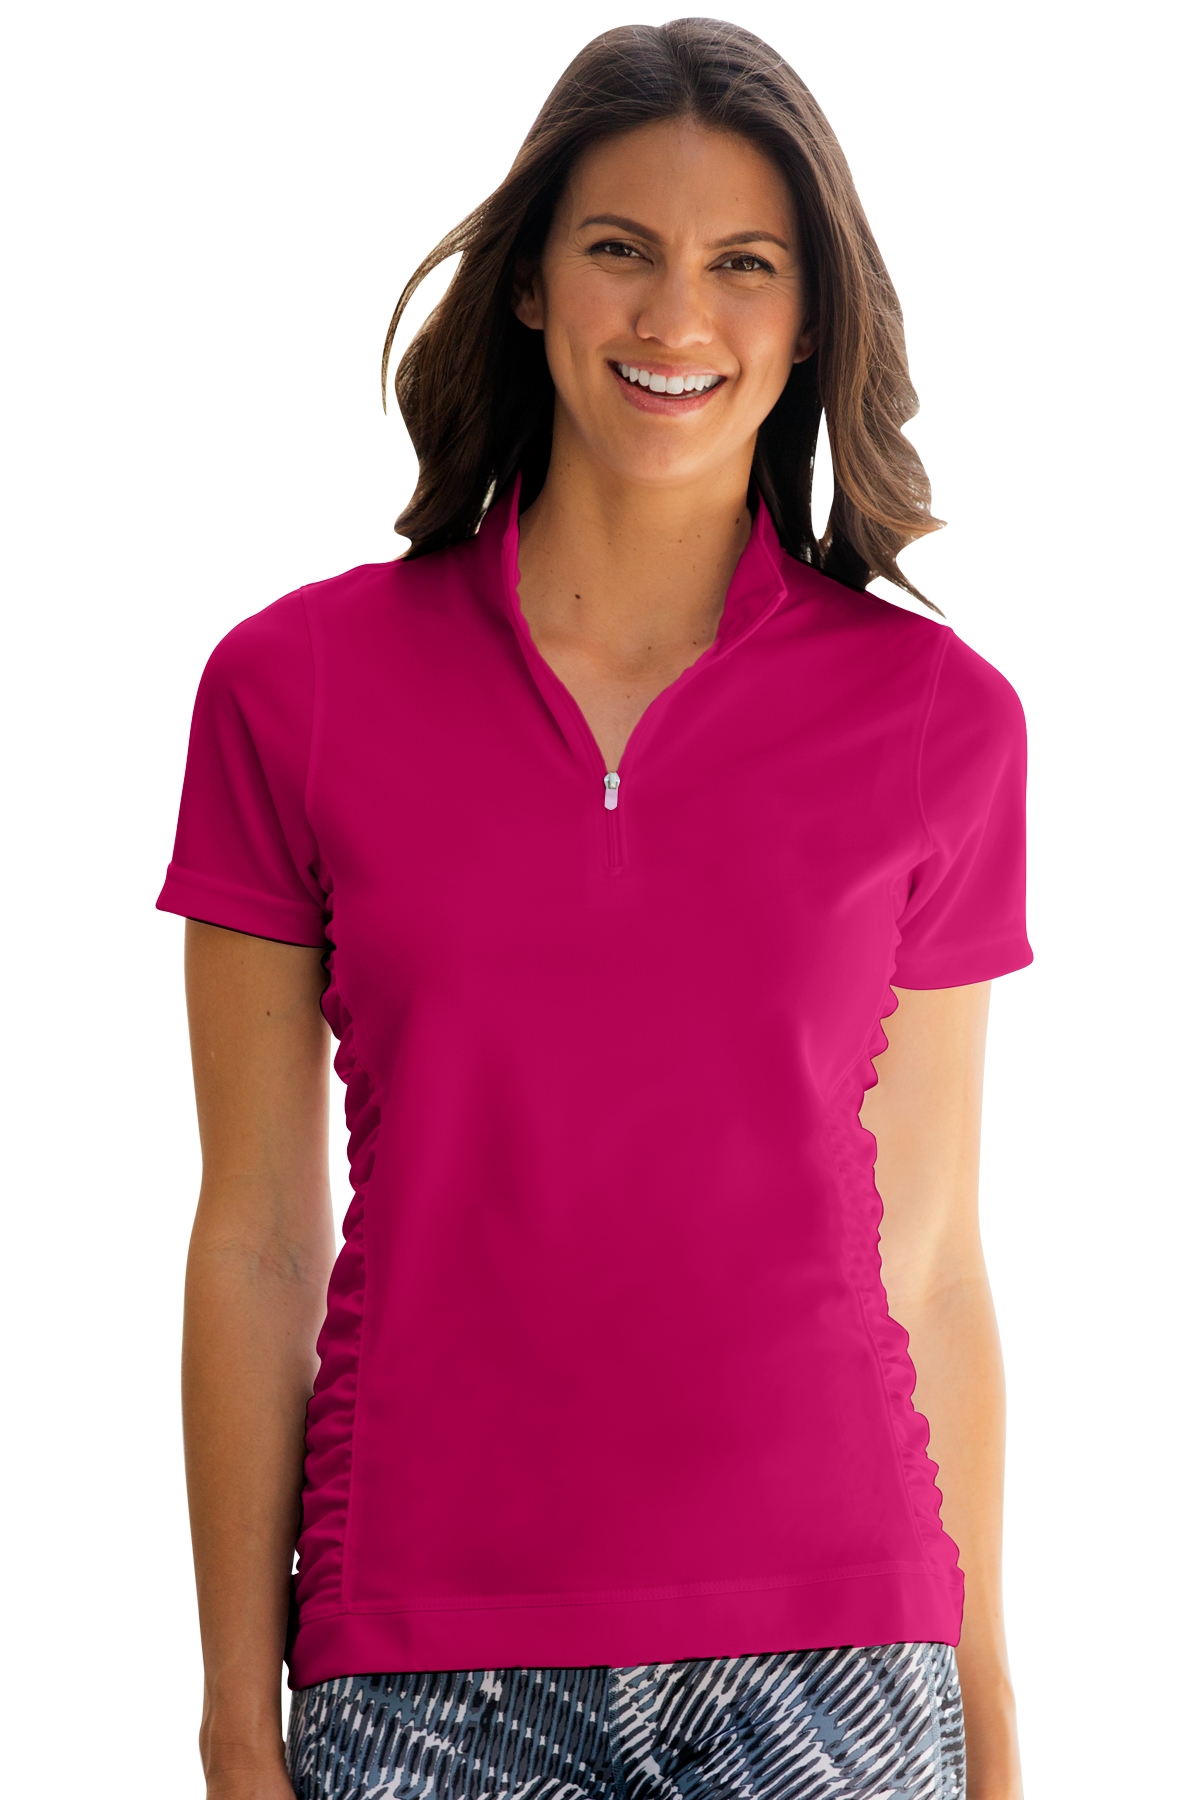 Vansport 2611 - Women's Omega Ruched Polo